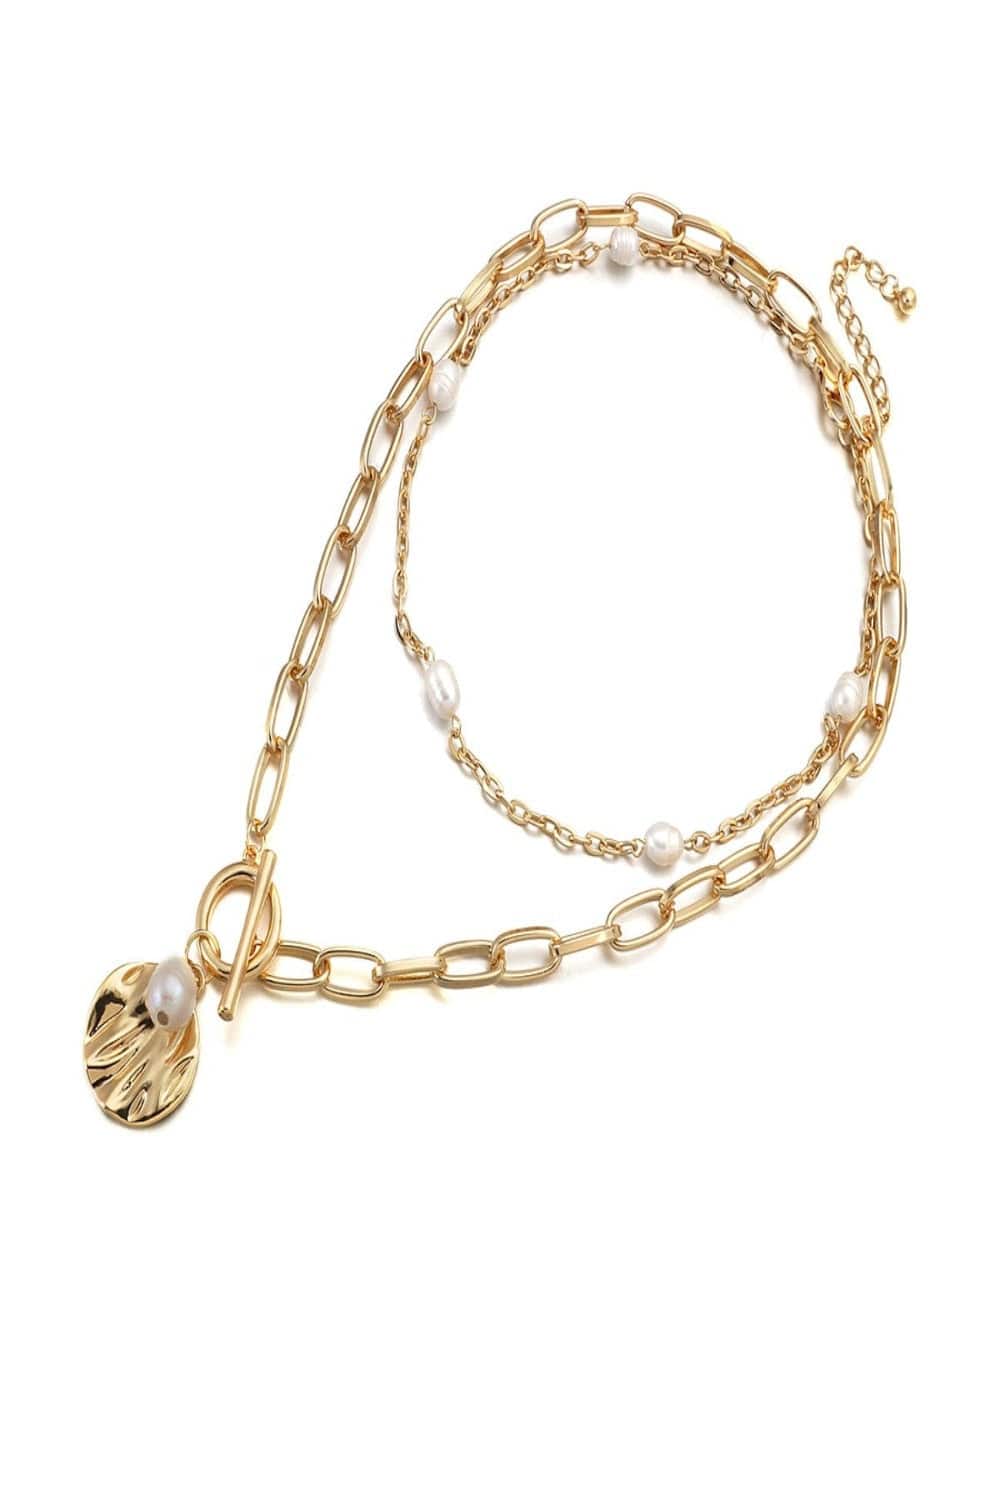 2 Tier Pearl Chain Pendant Gold Layered Necklace - TGC Boutique - Gold Necklace